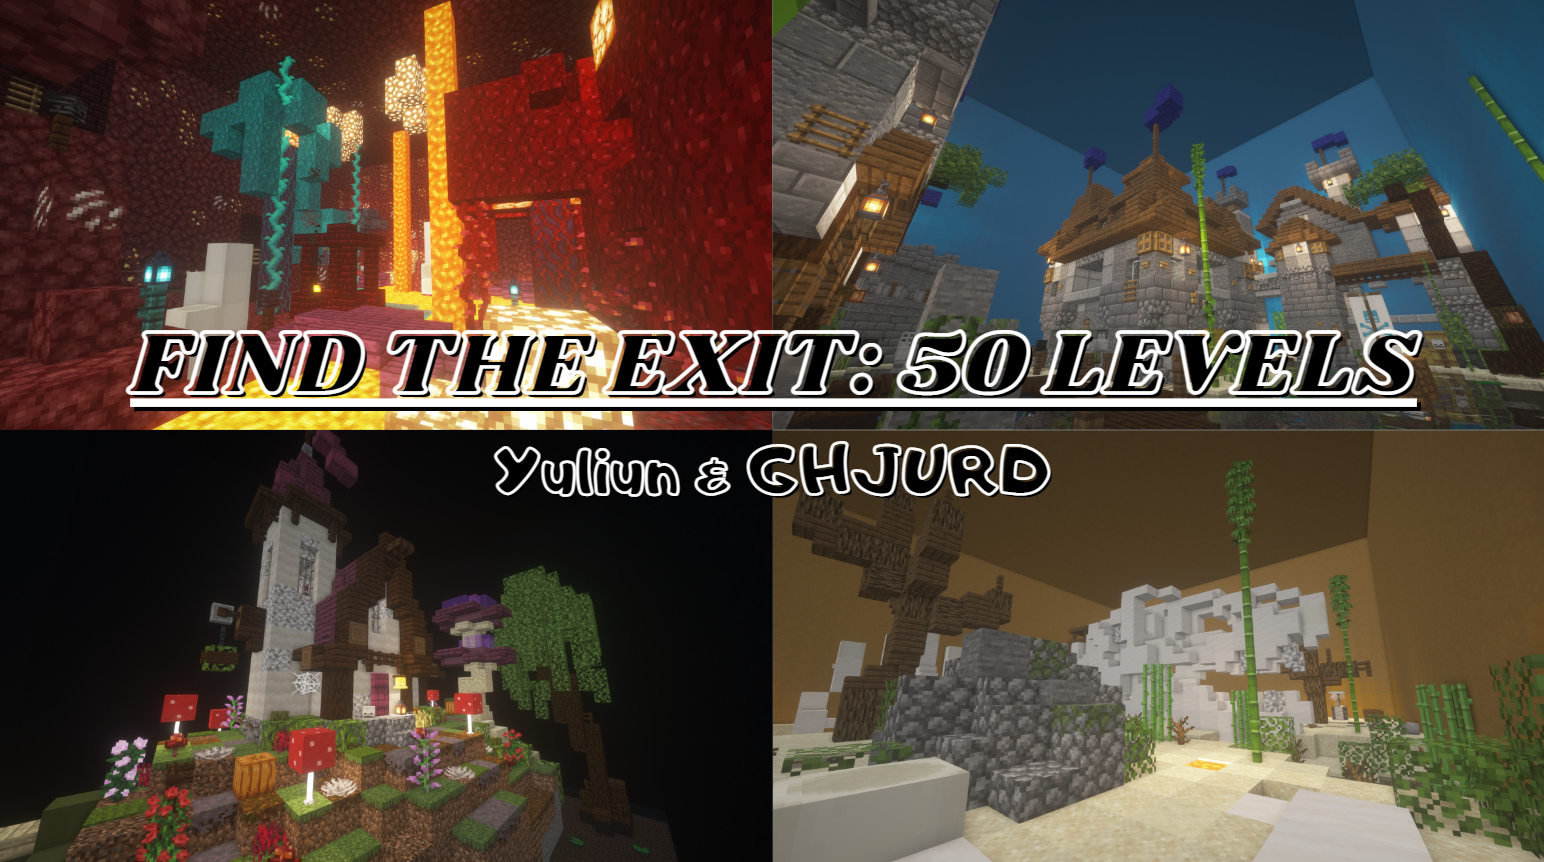 The logo for Find The Exit: 50 LEVELS, a Minecraft Map for 1.16.1 by YuliunIGHJURD